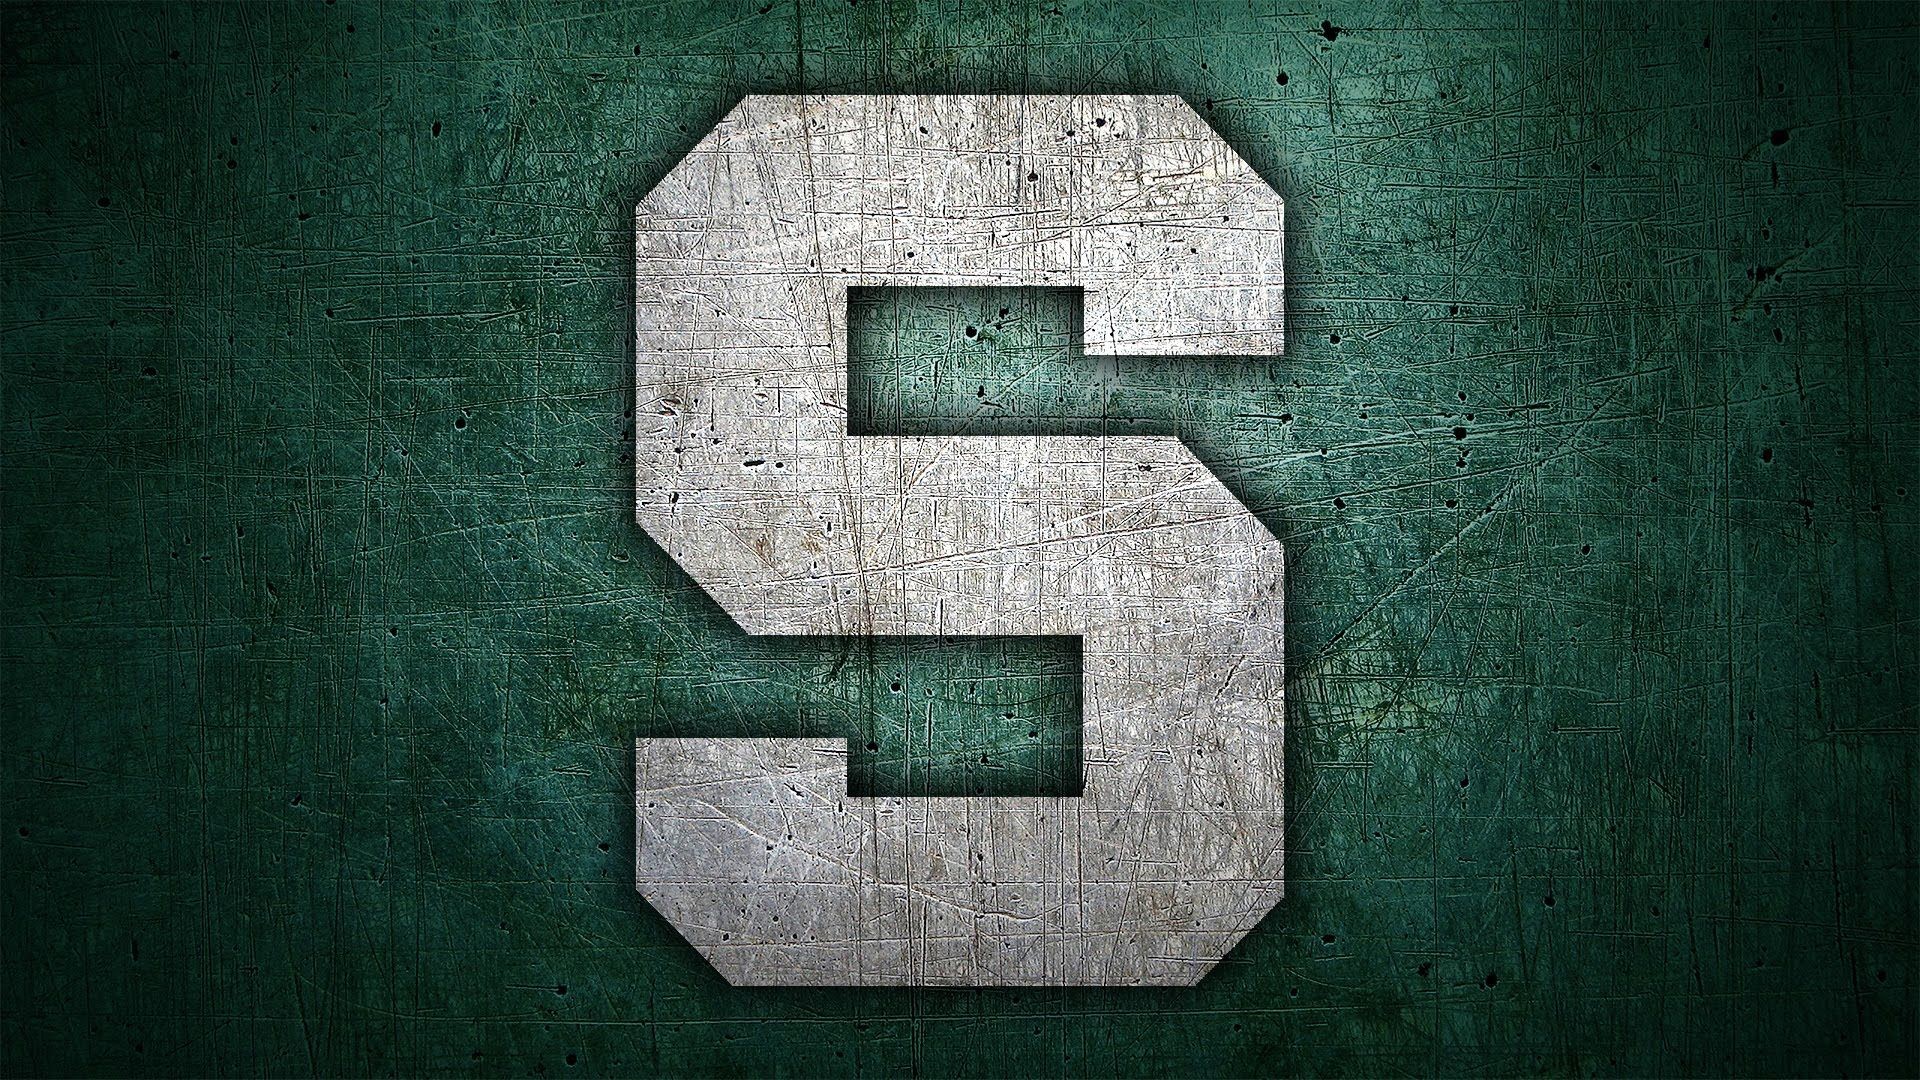 1920x1080 HD Michigan State Wallpapers - Page 2 of 3 - wallpaper.wiki